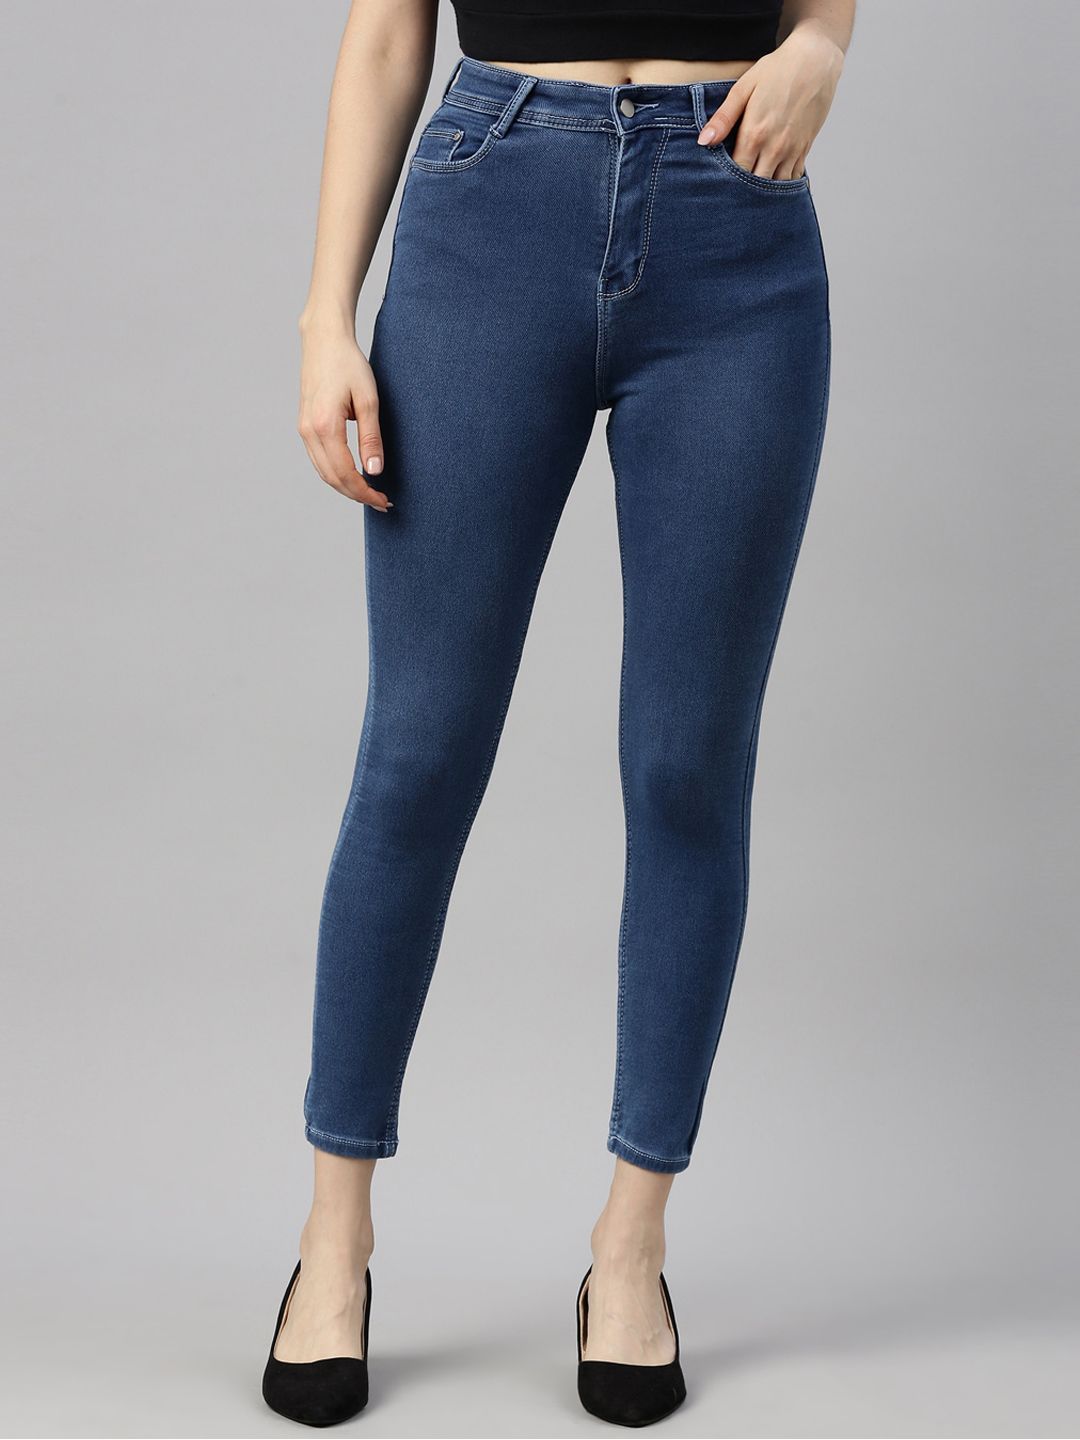 GOLDSTROMS Women Blue Slim Fit Stretchable Jeans Price in India